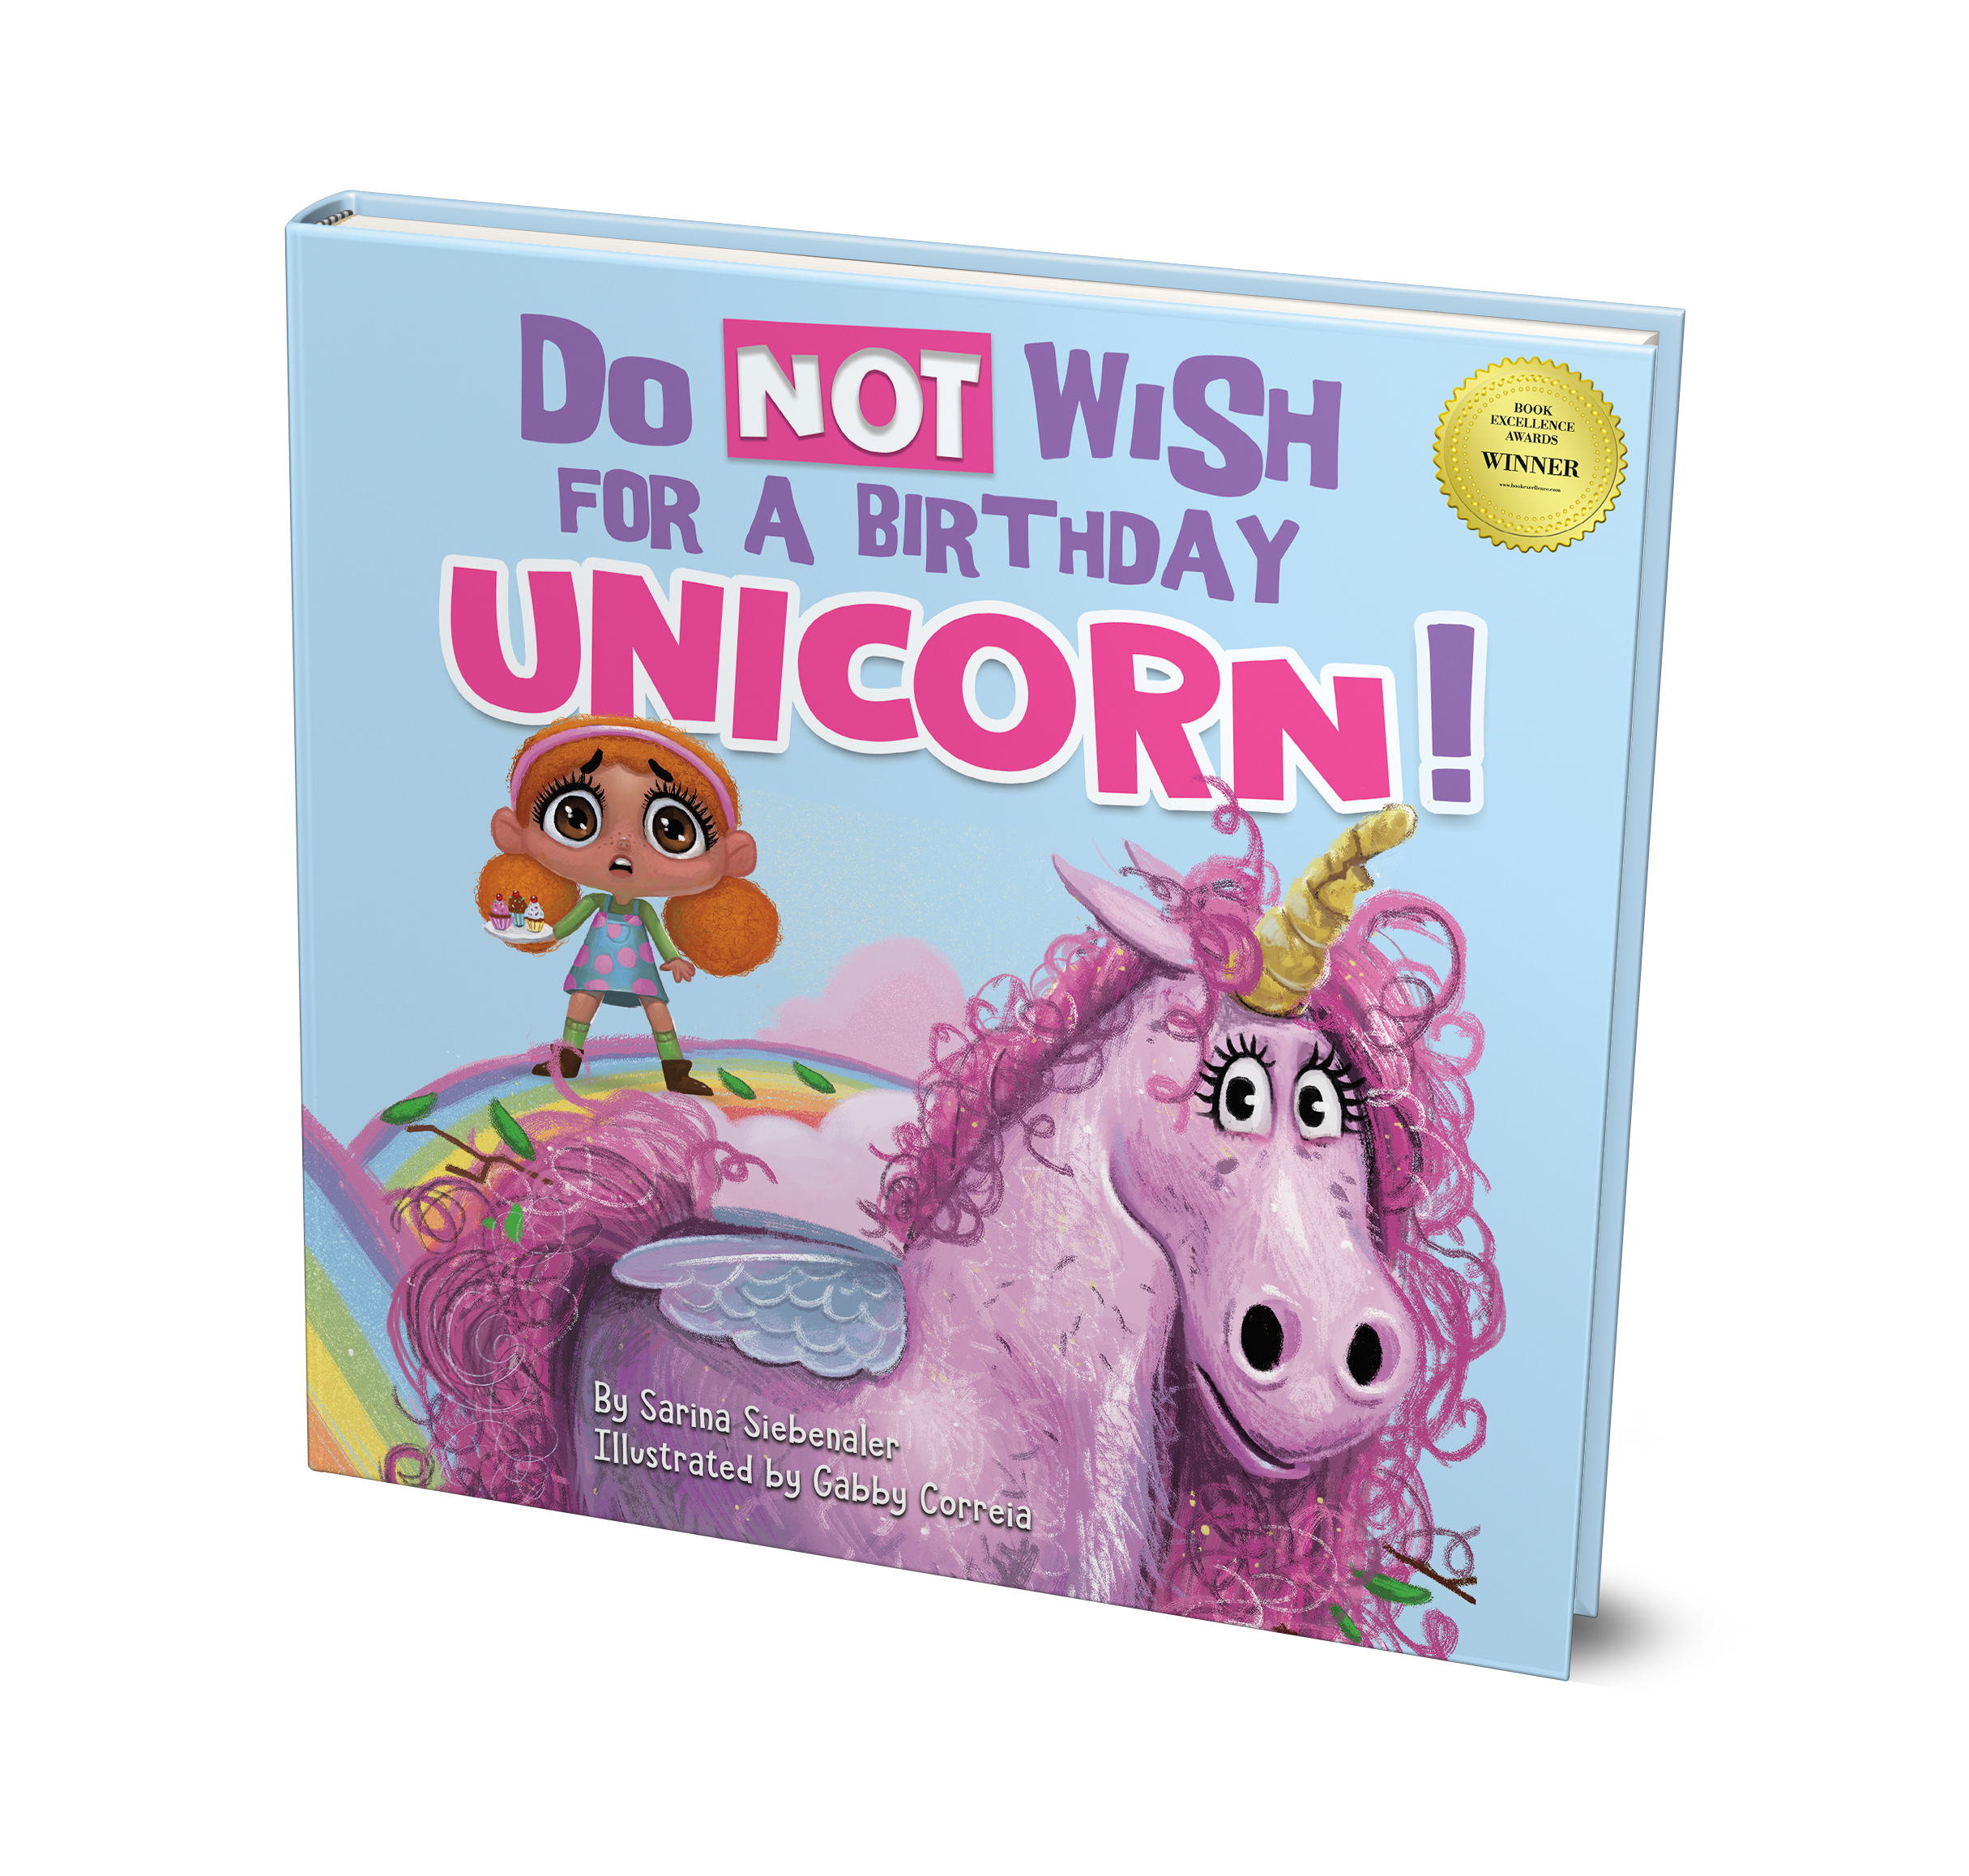 Sarina Siebenaler, Author of Do Not Wish for a Birthday Unicorn!, Honored as 2022 Book Excellence Award Winner